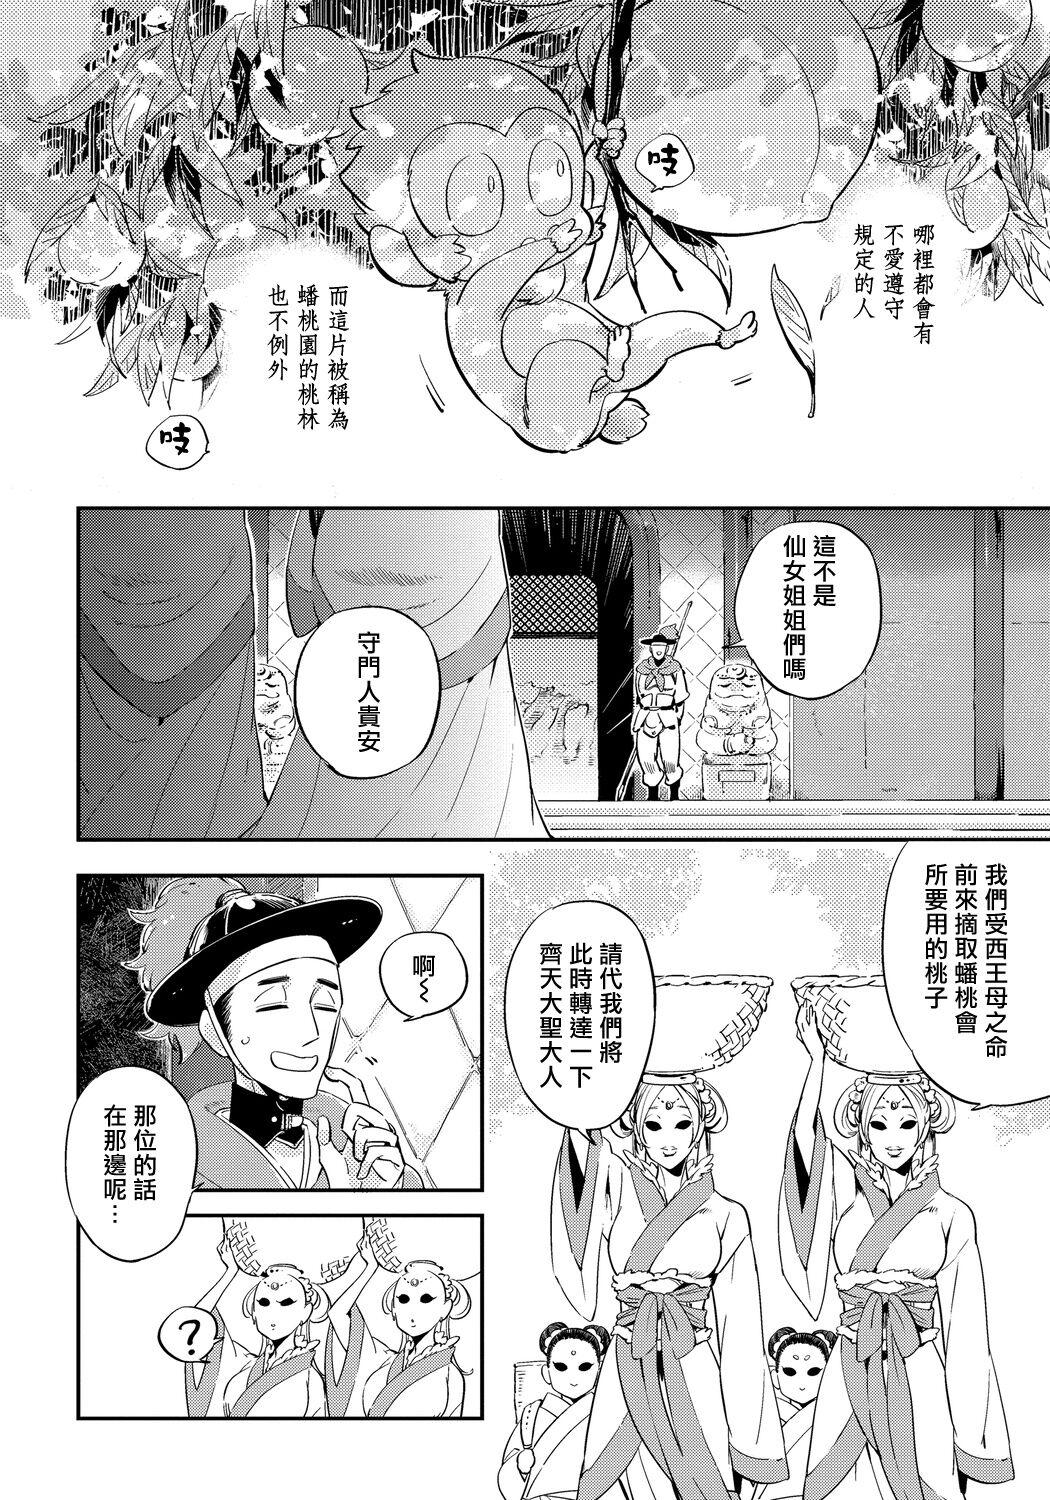 Punished 猴与桃 01 Watersports - Page 8